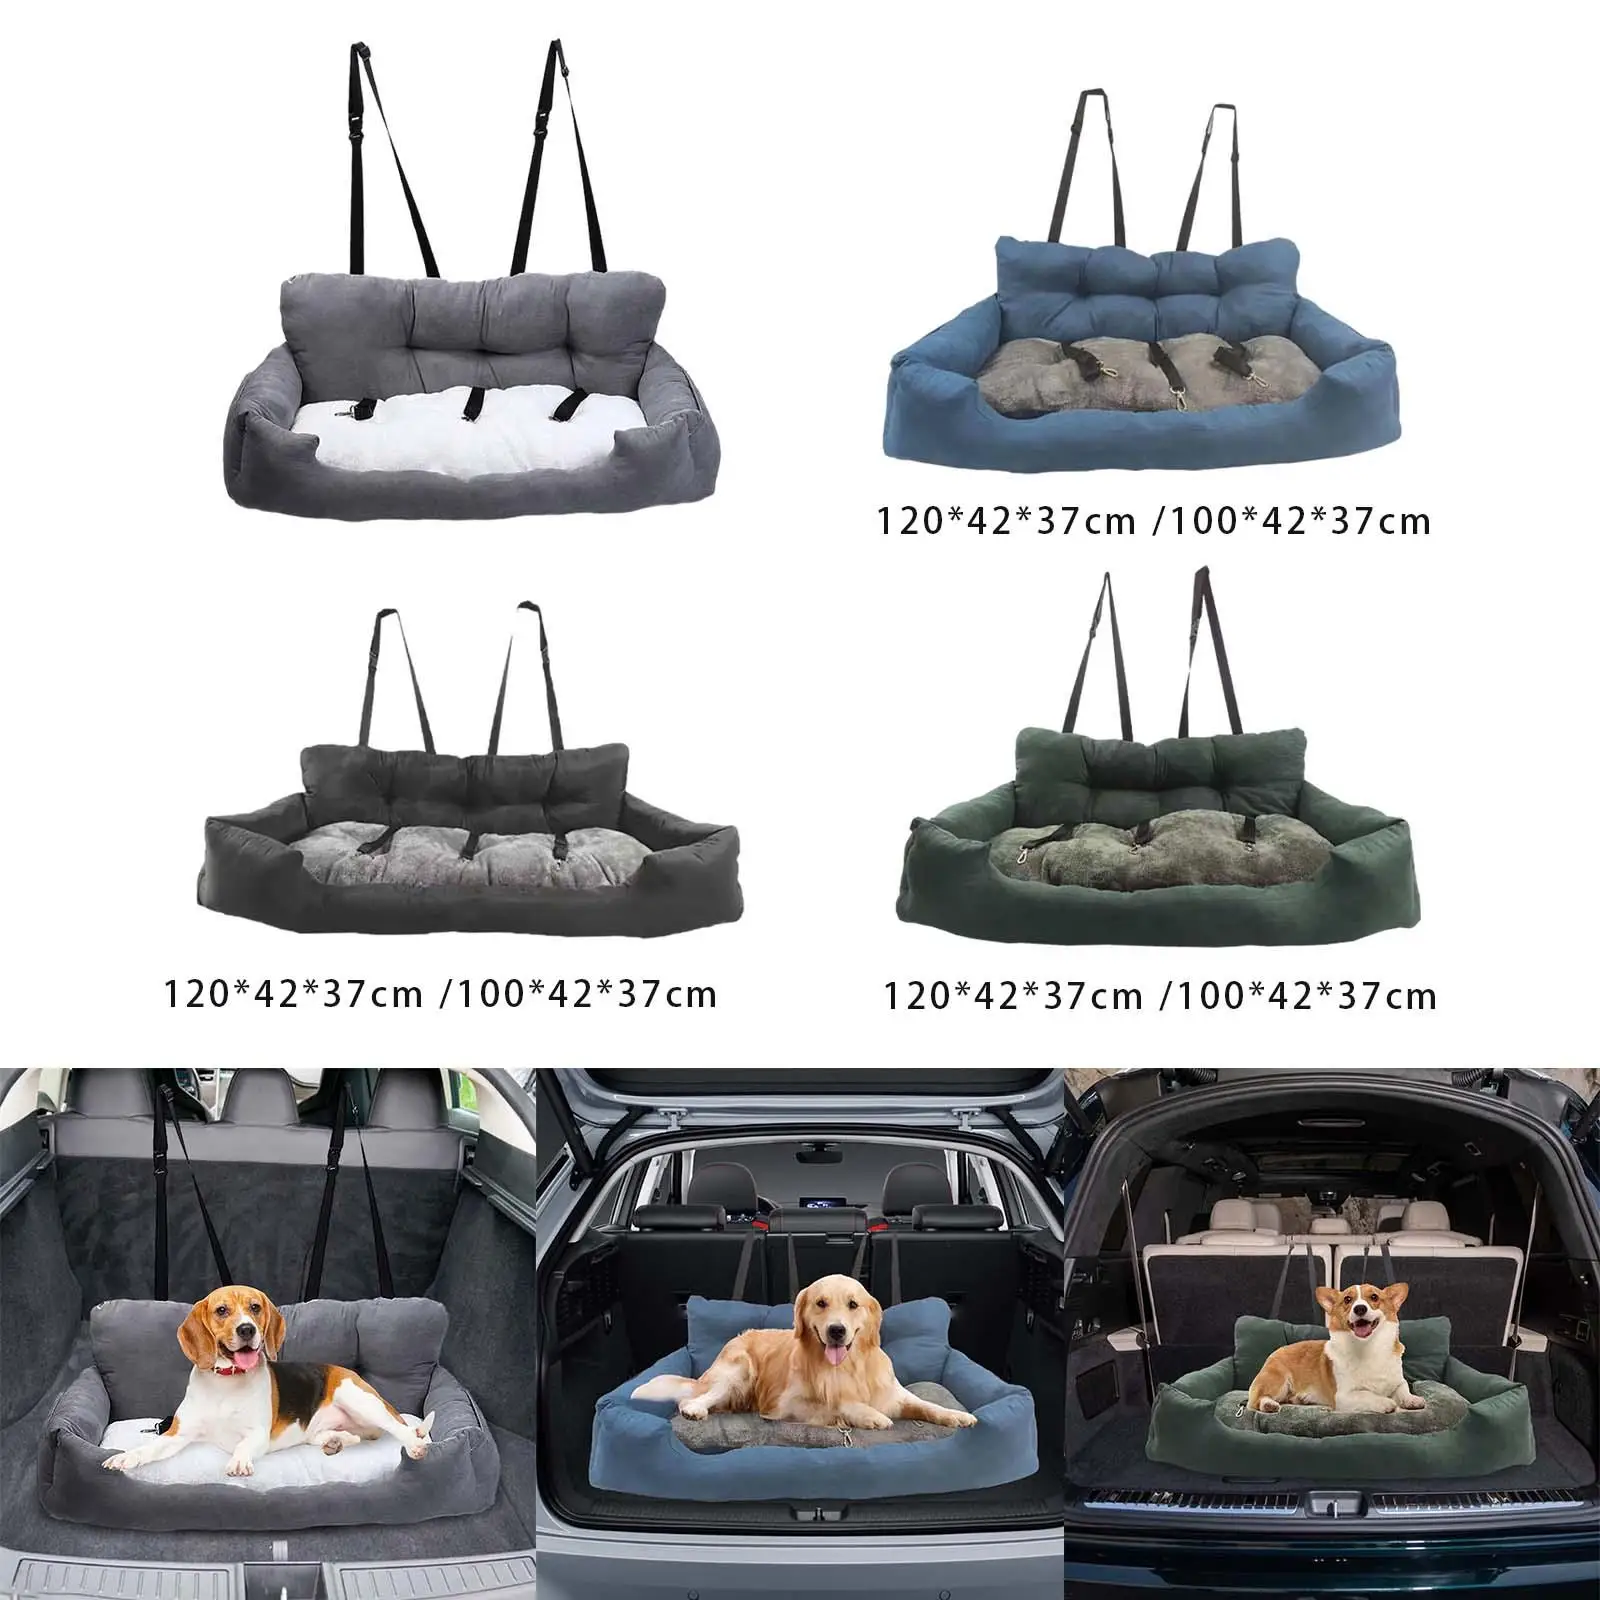 Dog Car Seat Comfortable with Removable Cover with Safety Straps Nonslip Pet Travel Booster Seat for Large Medium Small Dogs